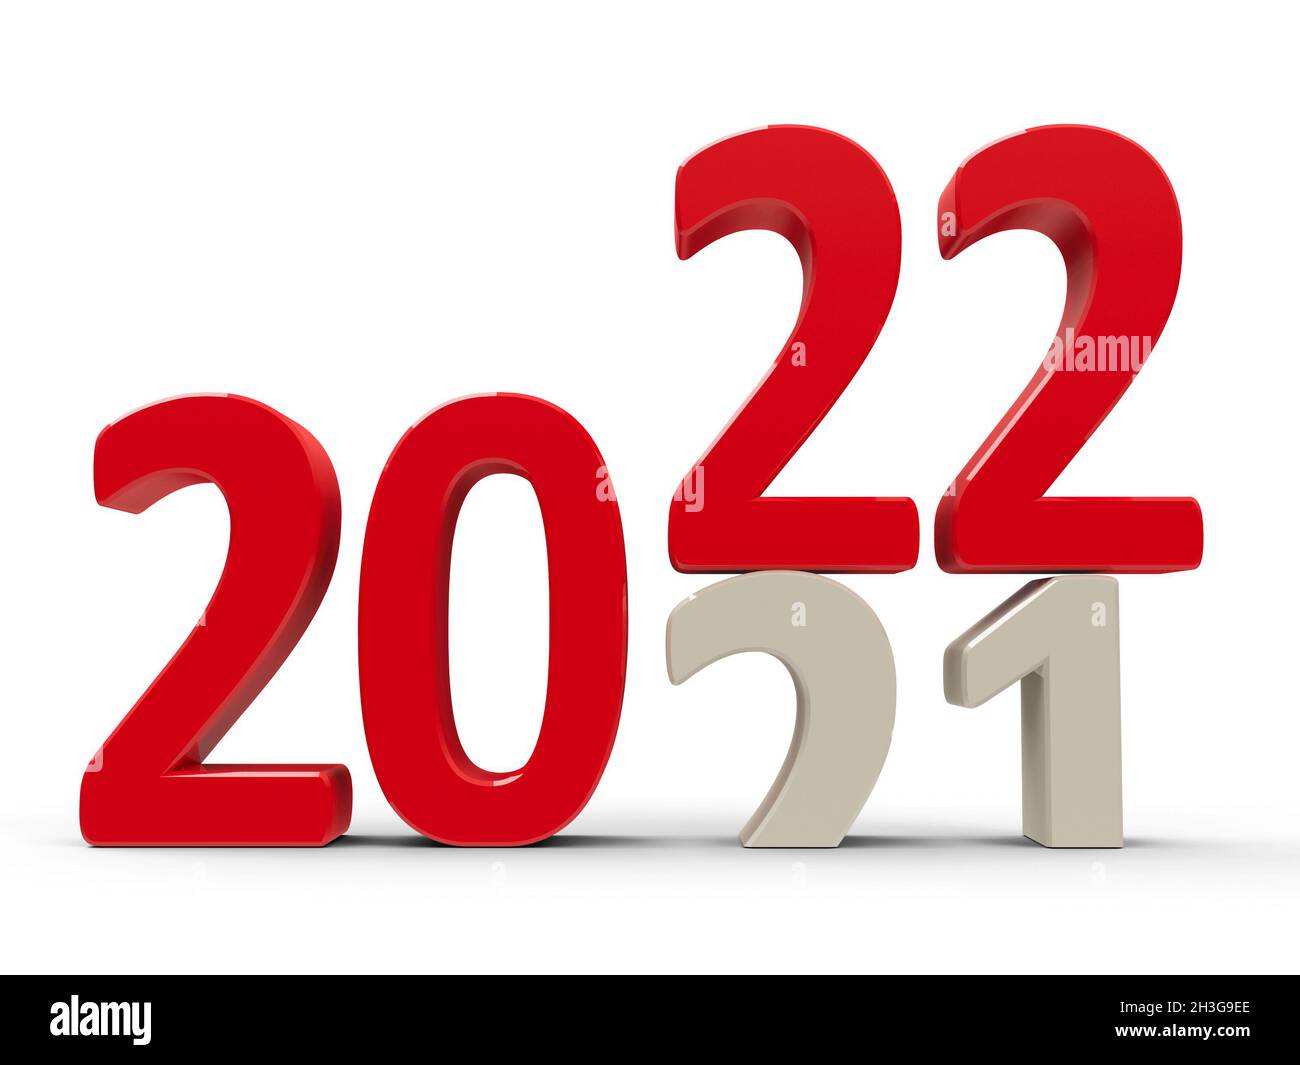 2021-2022 change represents the new year 2022, three-dimensional ...